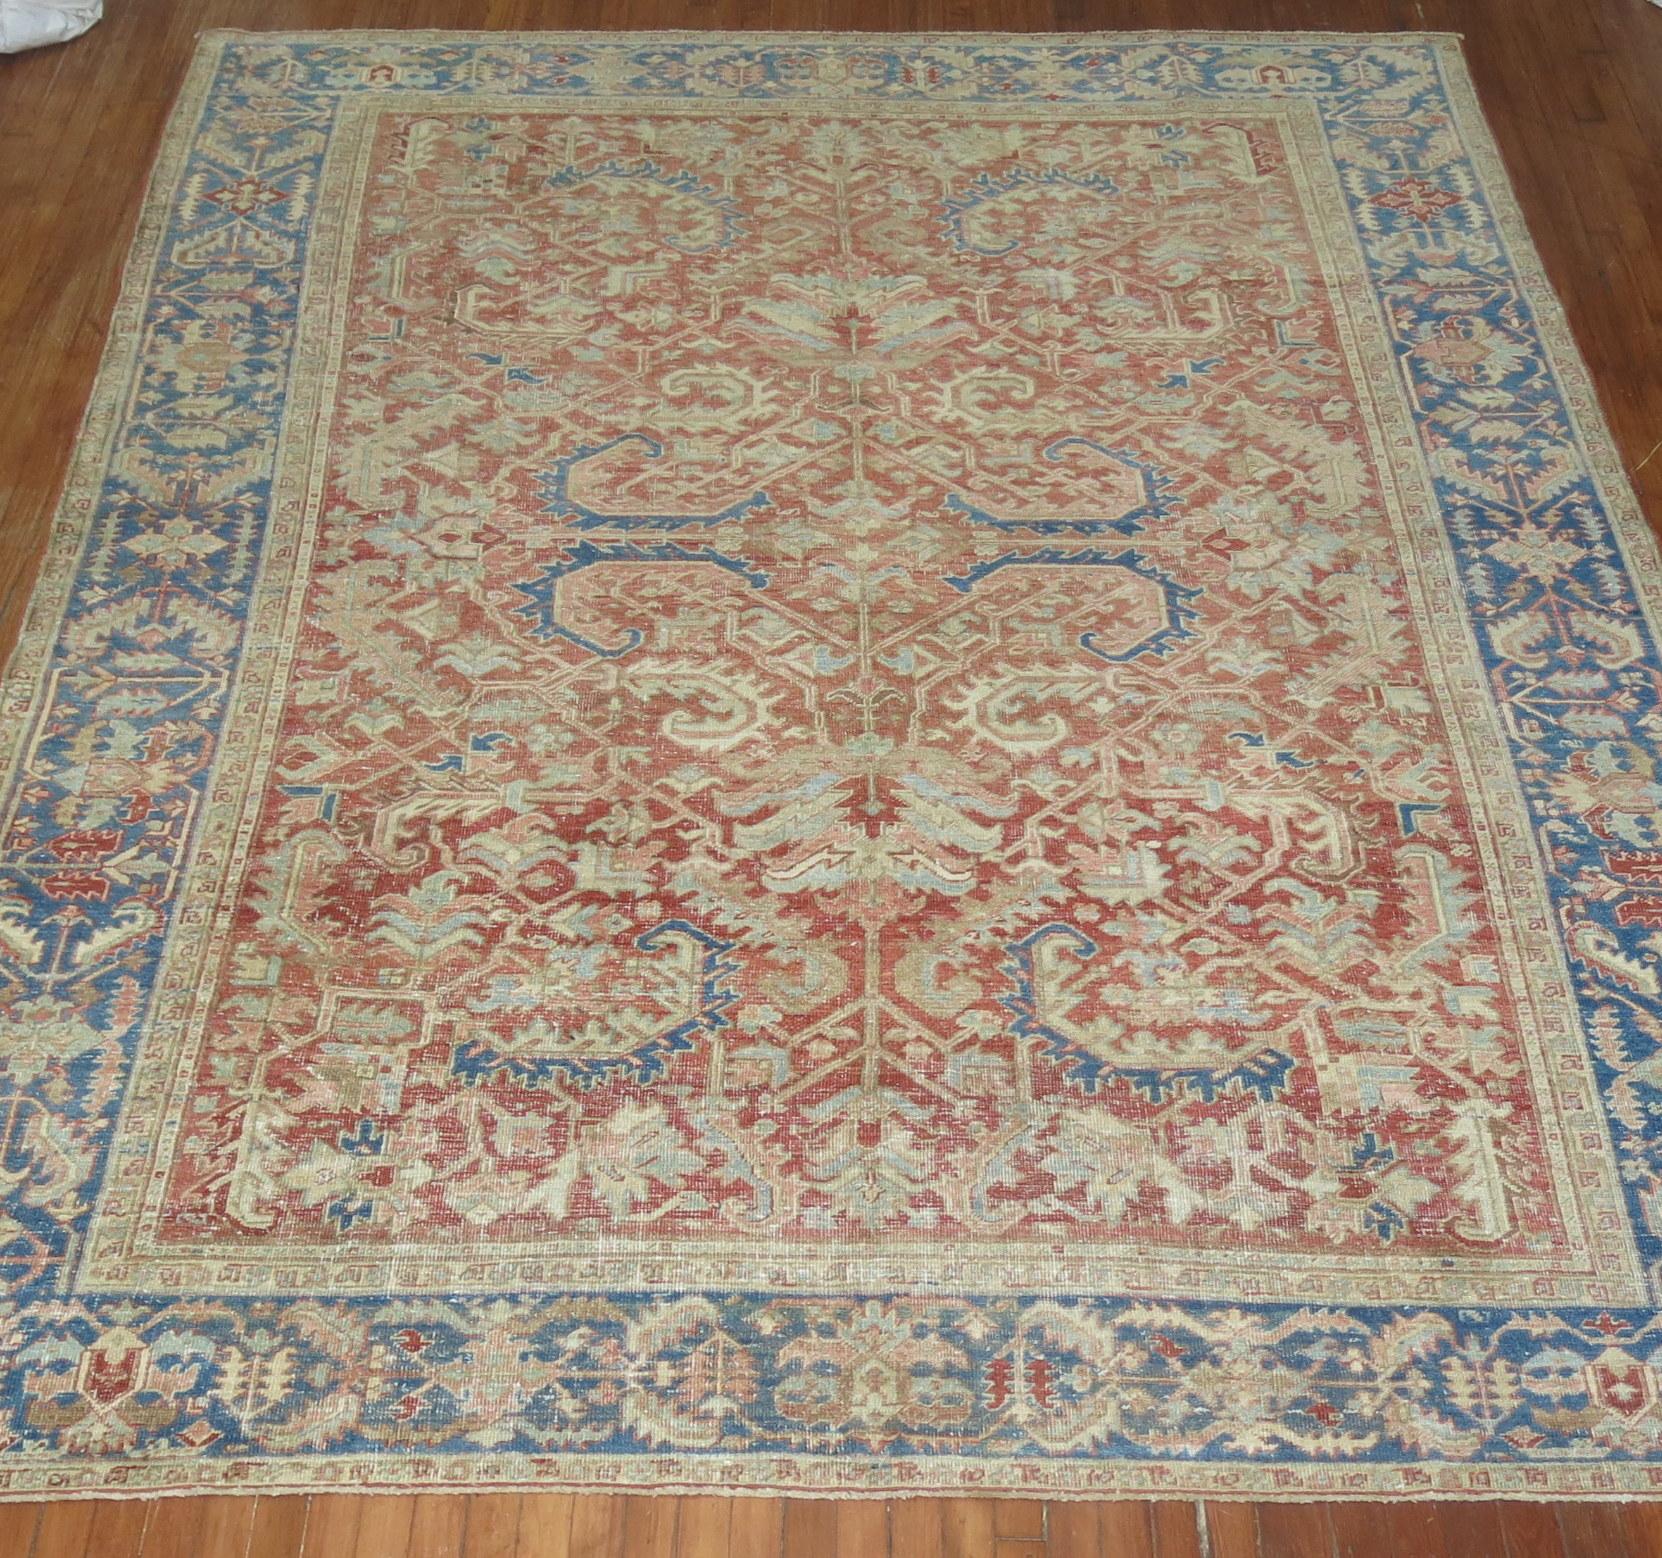 This is an early 20th century handwoven decorative room size Persian Heriz rug . Soft red field with soft blue border. Perfect amount of wear, sturdy enough to handle every-day traffic.

With distinctive large-scale motifs and a wide ranging